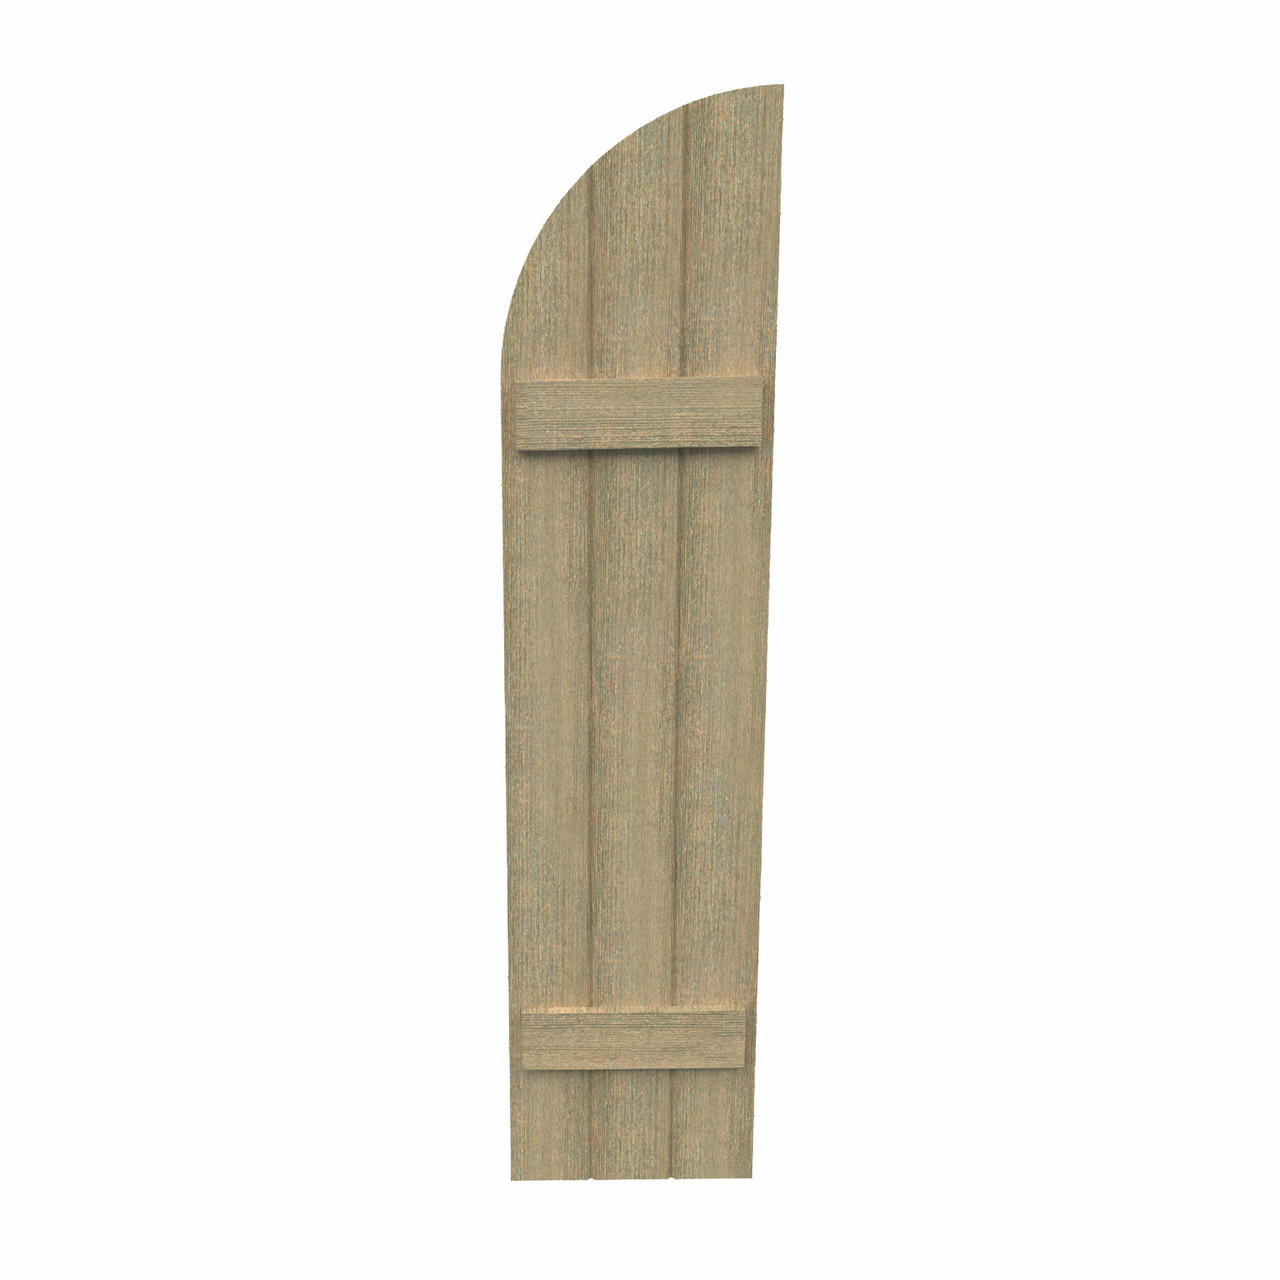 14 inch by 83 inch Quarter Round Shutter with 3-Boards